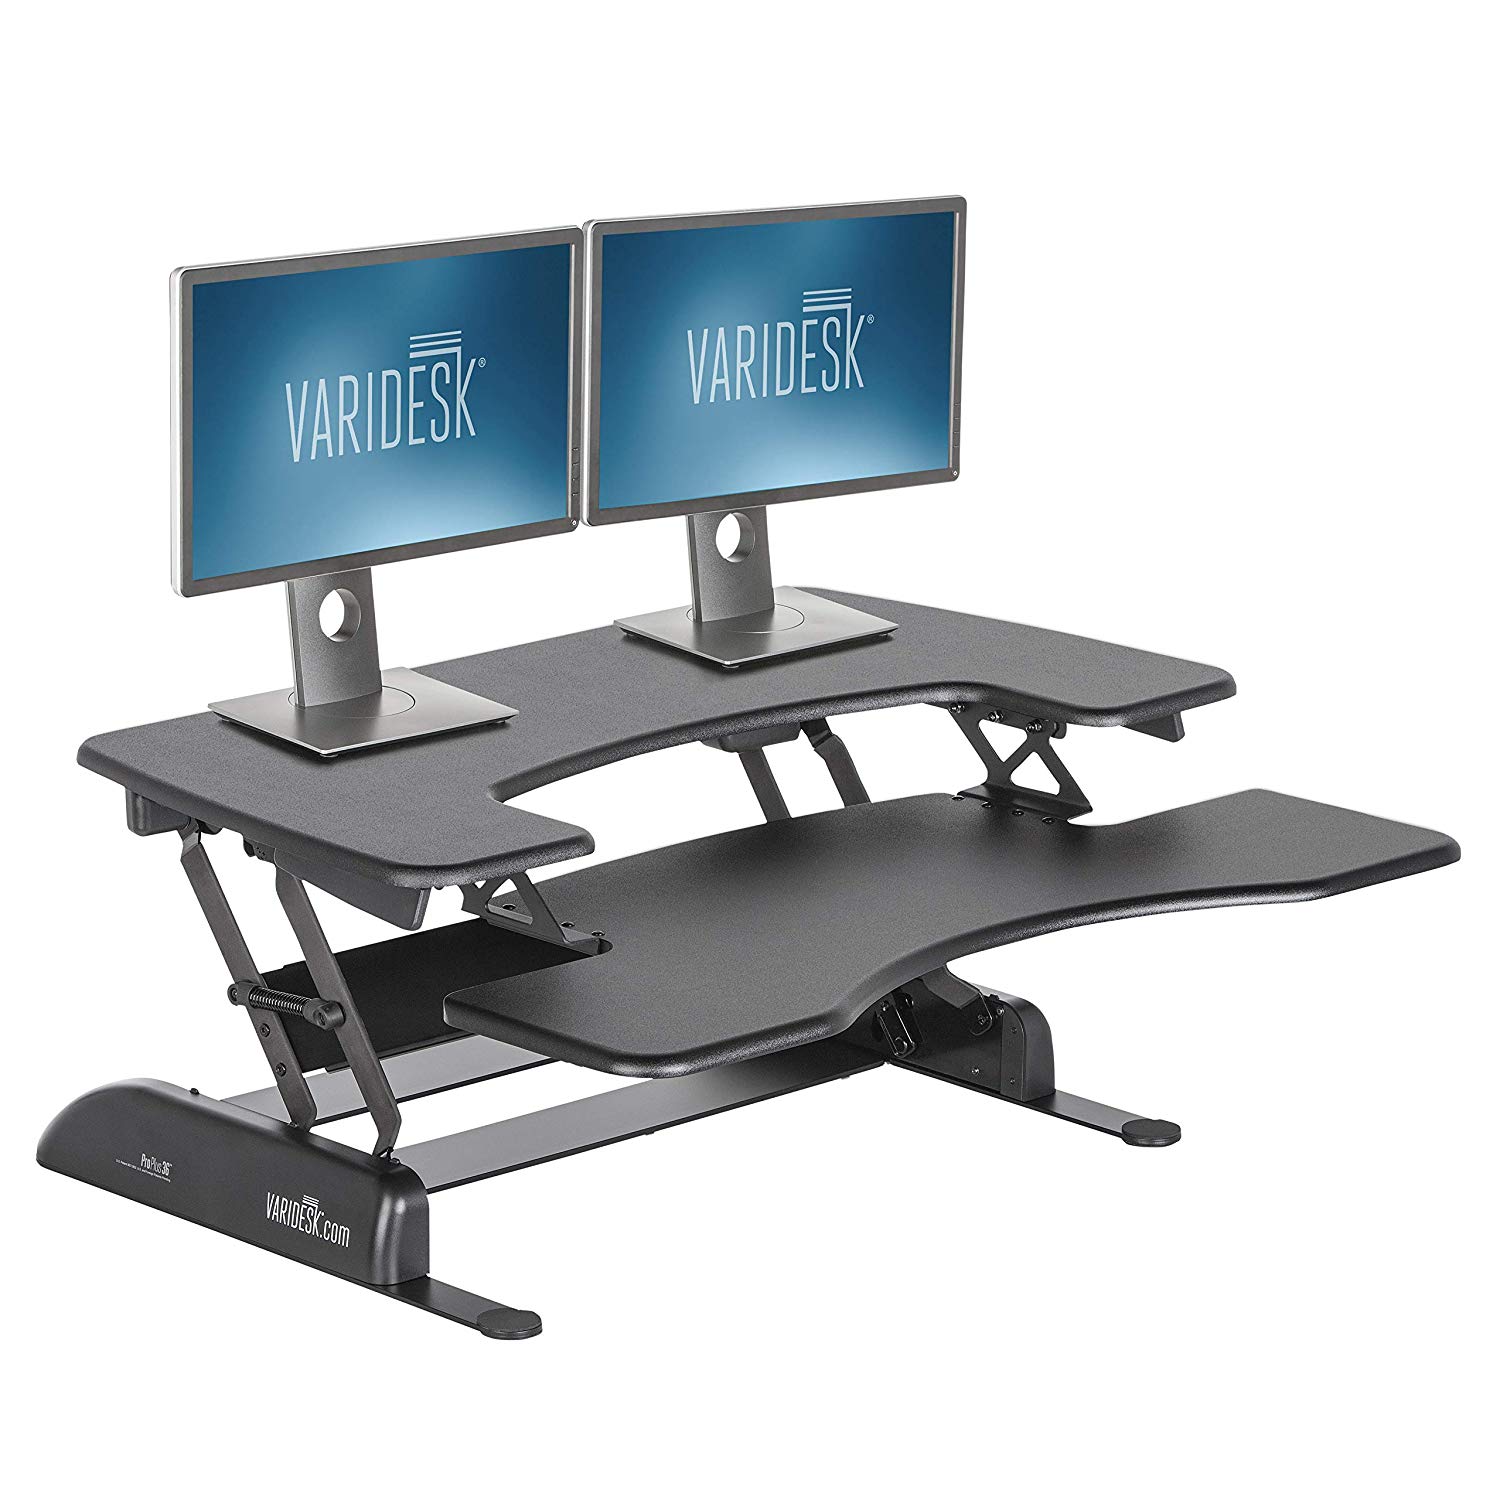 Versadesk Power Pro Black 36 X 24 Push Button Electric Height Adjustable Sit To Stand Desk Riser At Staples